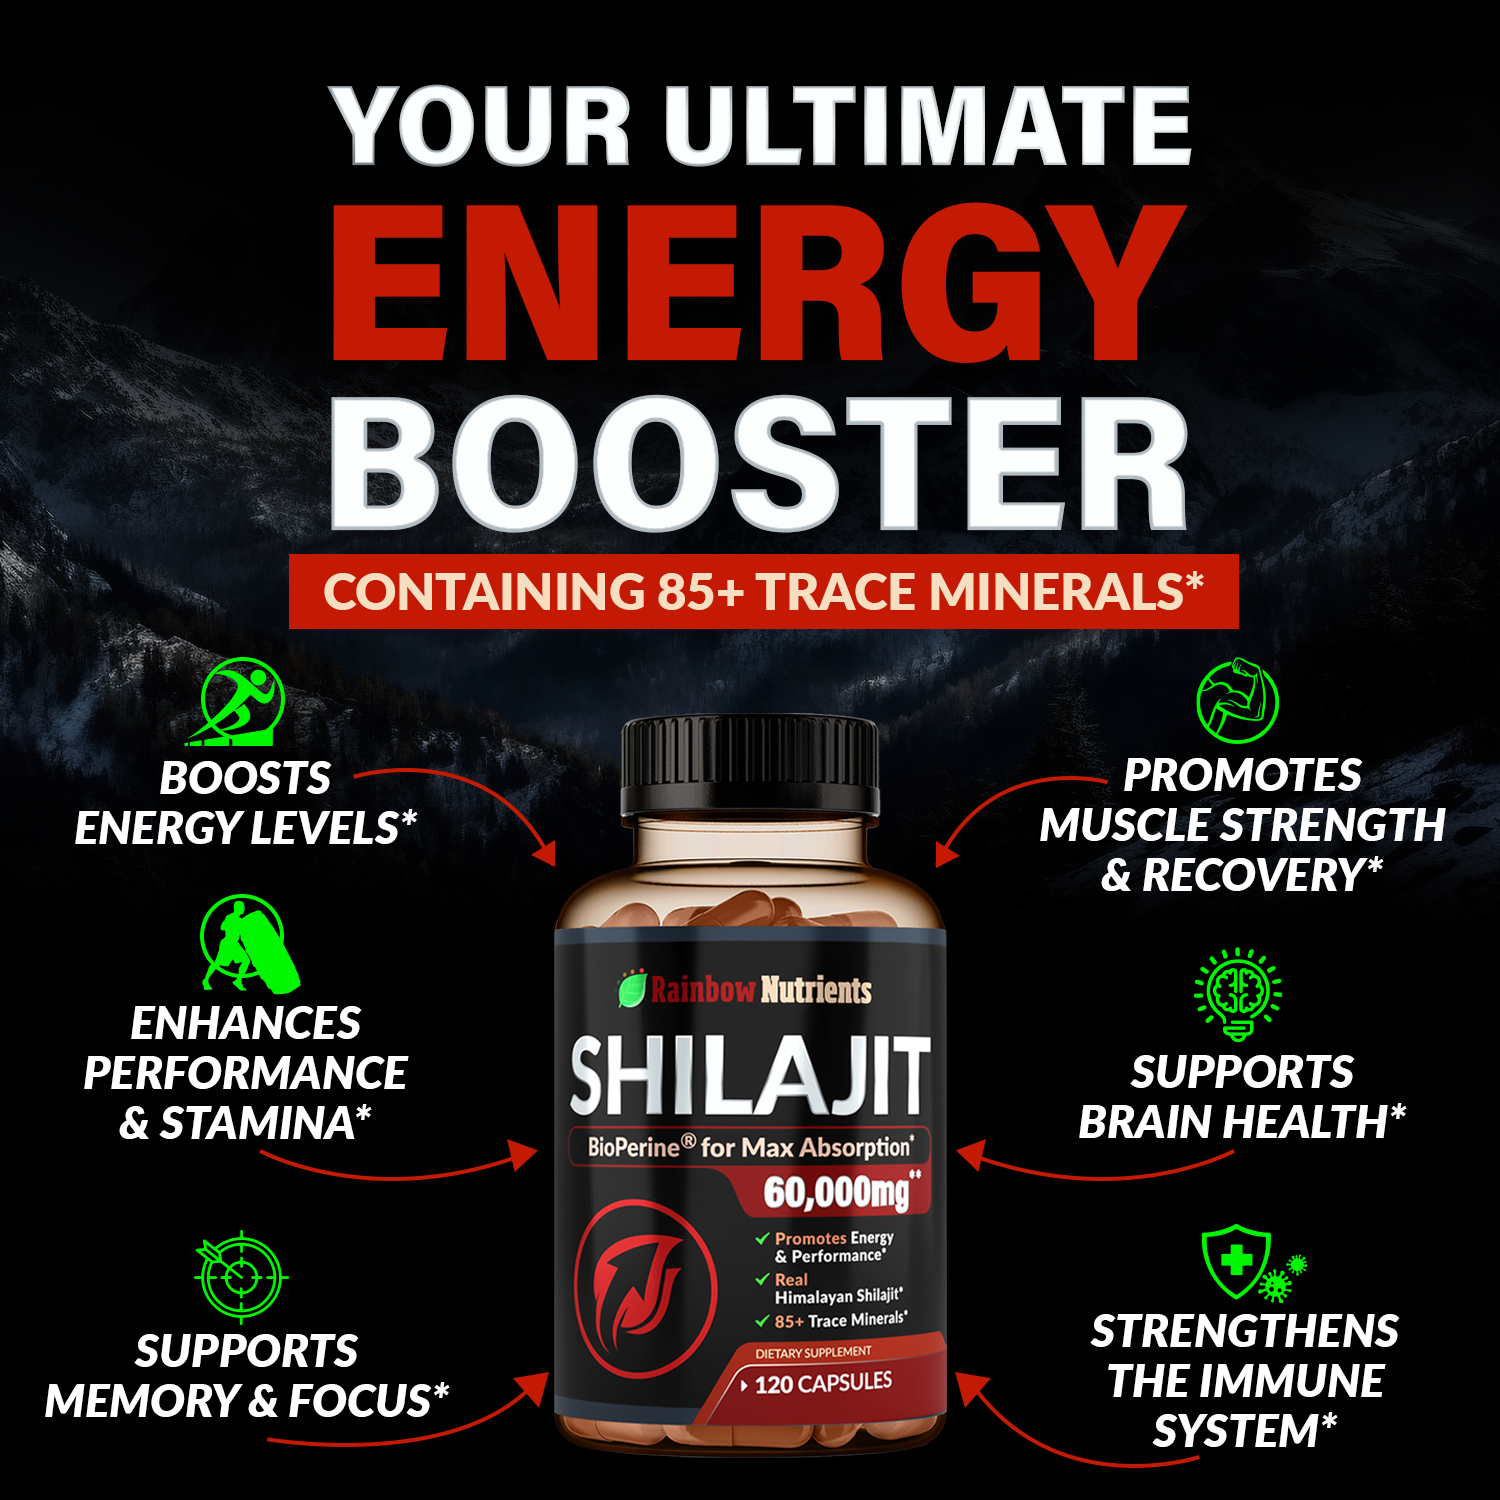 Your ultimate energy booster